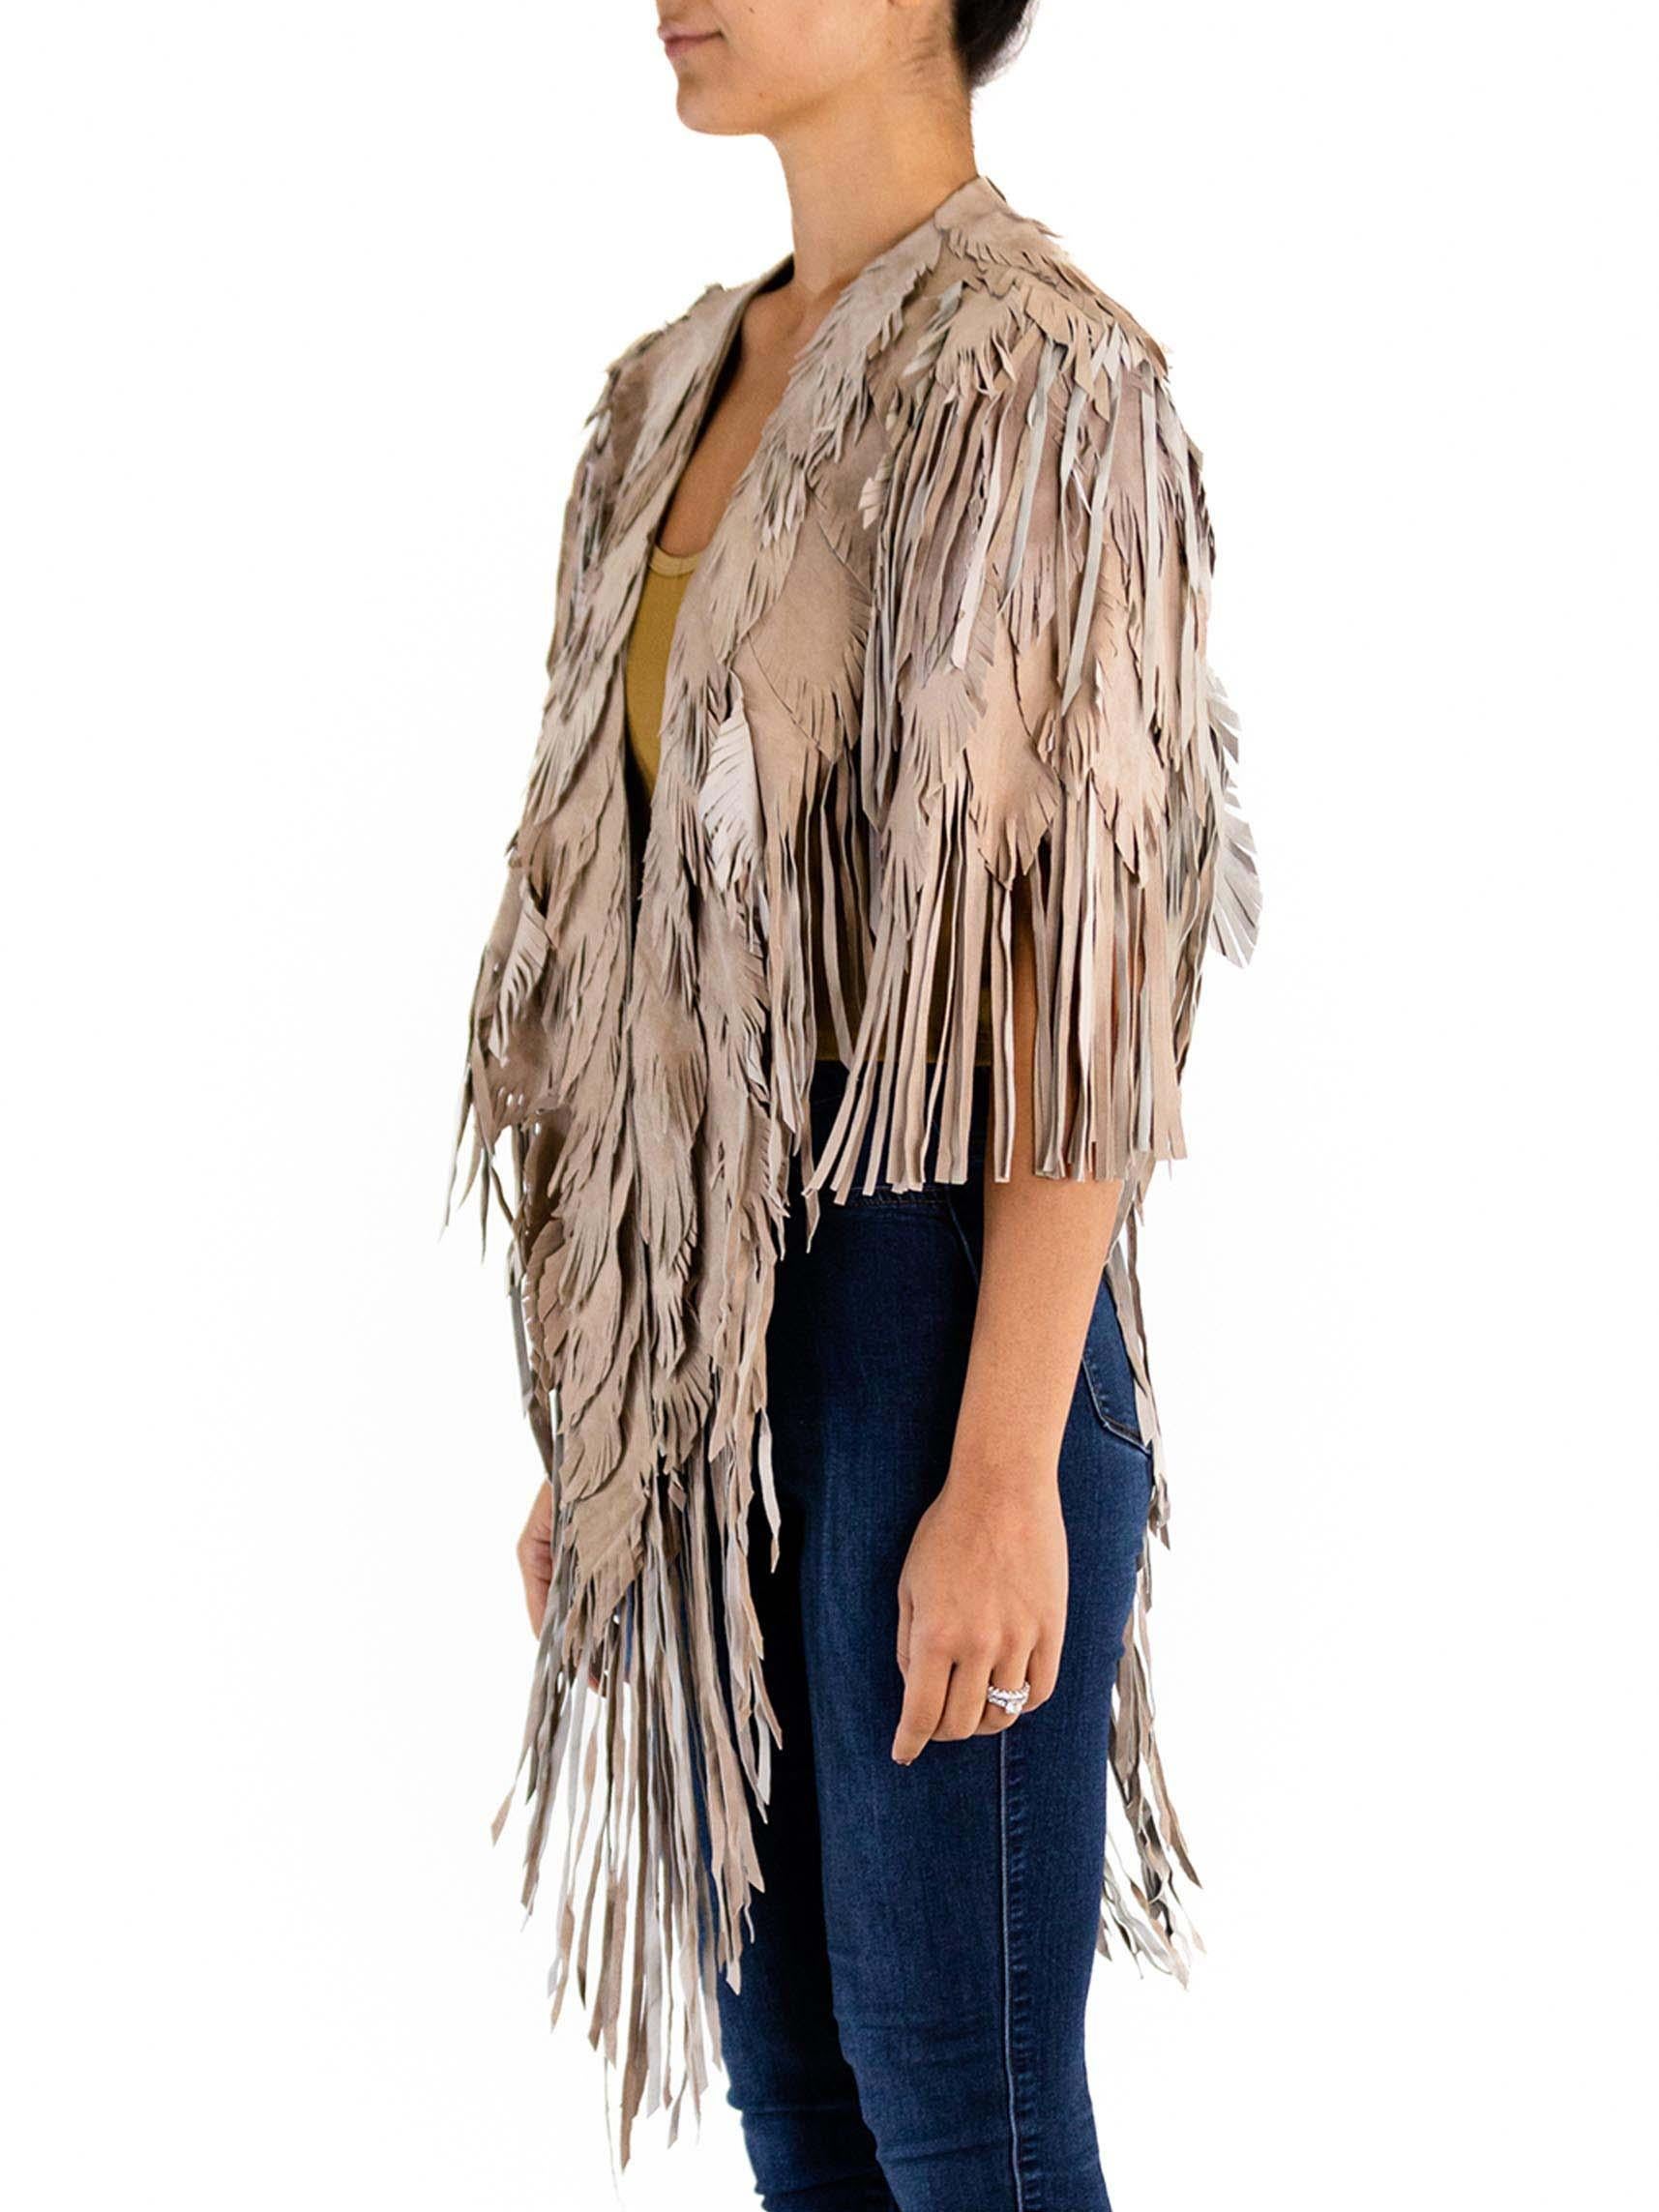 Each Feather-Leather is made by hand by our friends in Columbia in their co-op owned and operated facilities.  Morphew Collection Sand Piper Suede Fringe Feather Leather Long Cape 
MORPHEW COLLECTION is made entirely by hand in our NYC Ateliér of